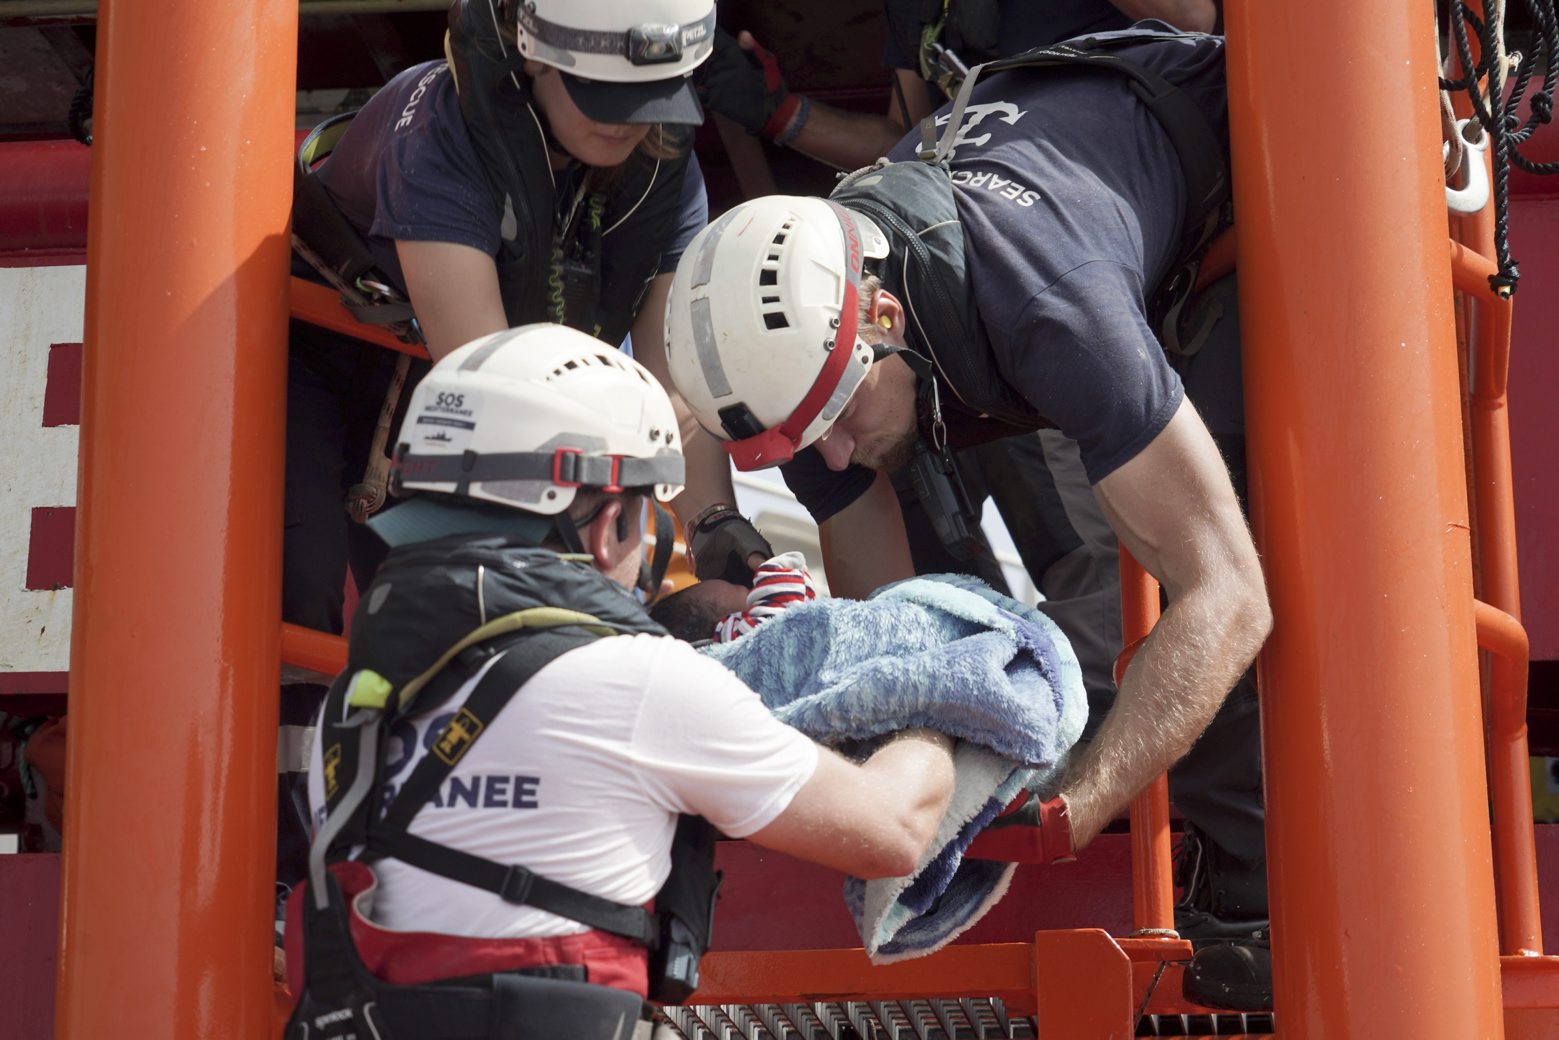 A newborn baby is carried onto the Ocean Viking humanitarian rescue ship after a rescue operation some 53 nautical miles (98 kilometers) from the coast of Libya in the Mediterranean Sea, Tuesday, Sept. 17, 2019. The humanitarian rescue ship Ocean Viking pulled 48 people from a small and overcrowded wooden boat including a newborn and a pregnant woman. (AP Photo/Renata Brito) Europe Migrants